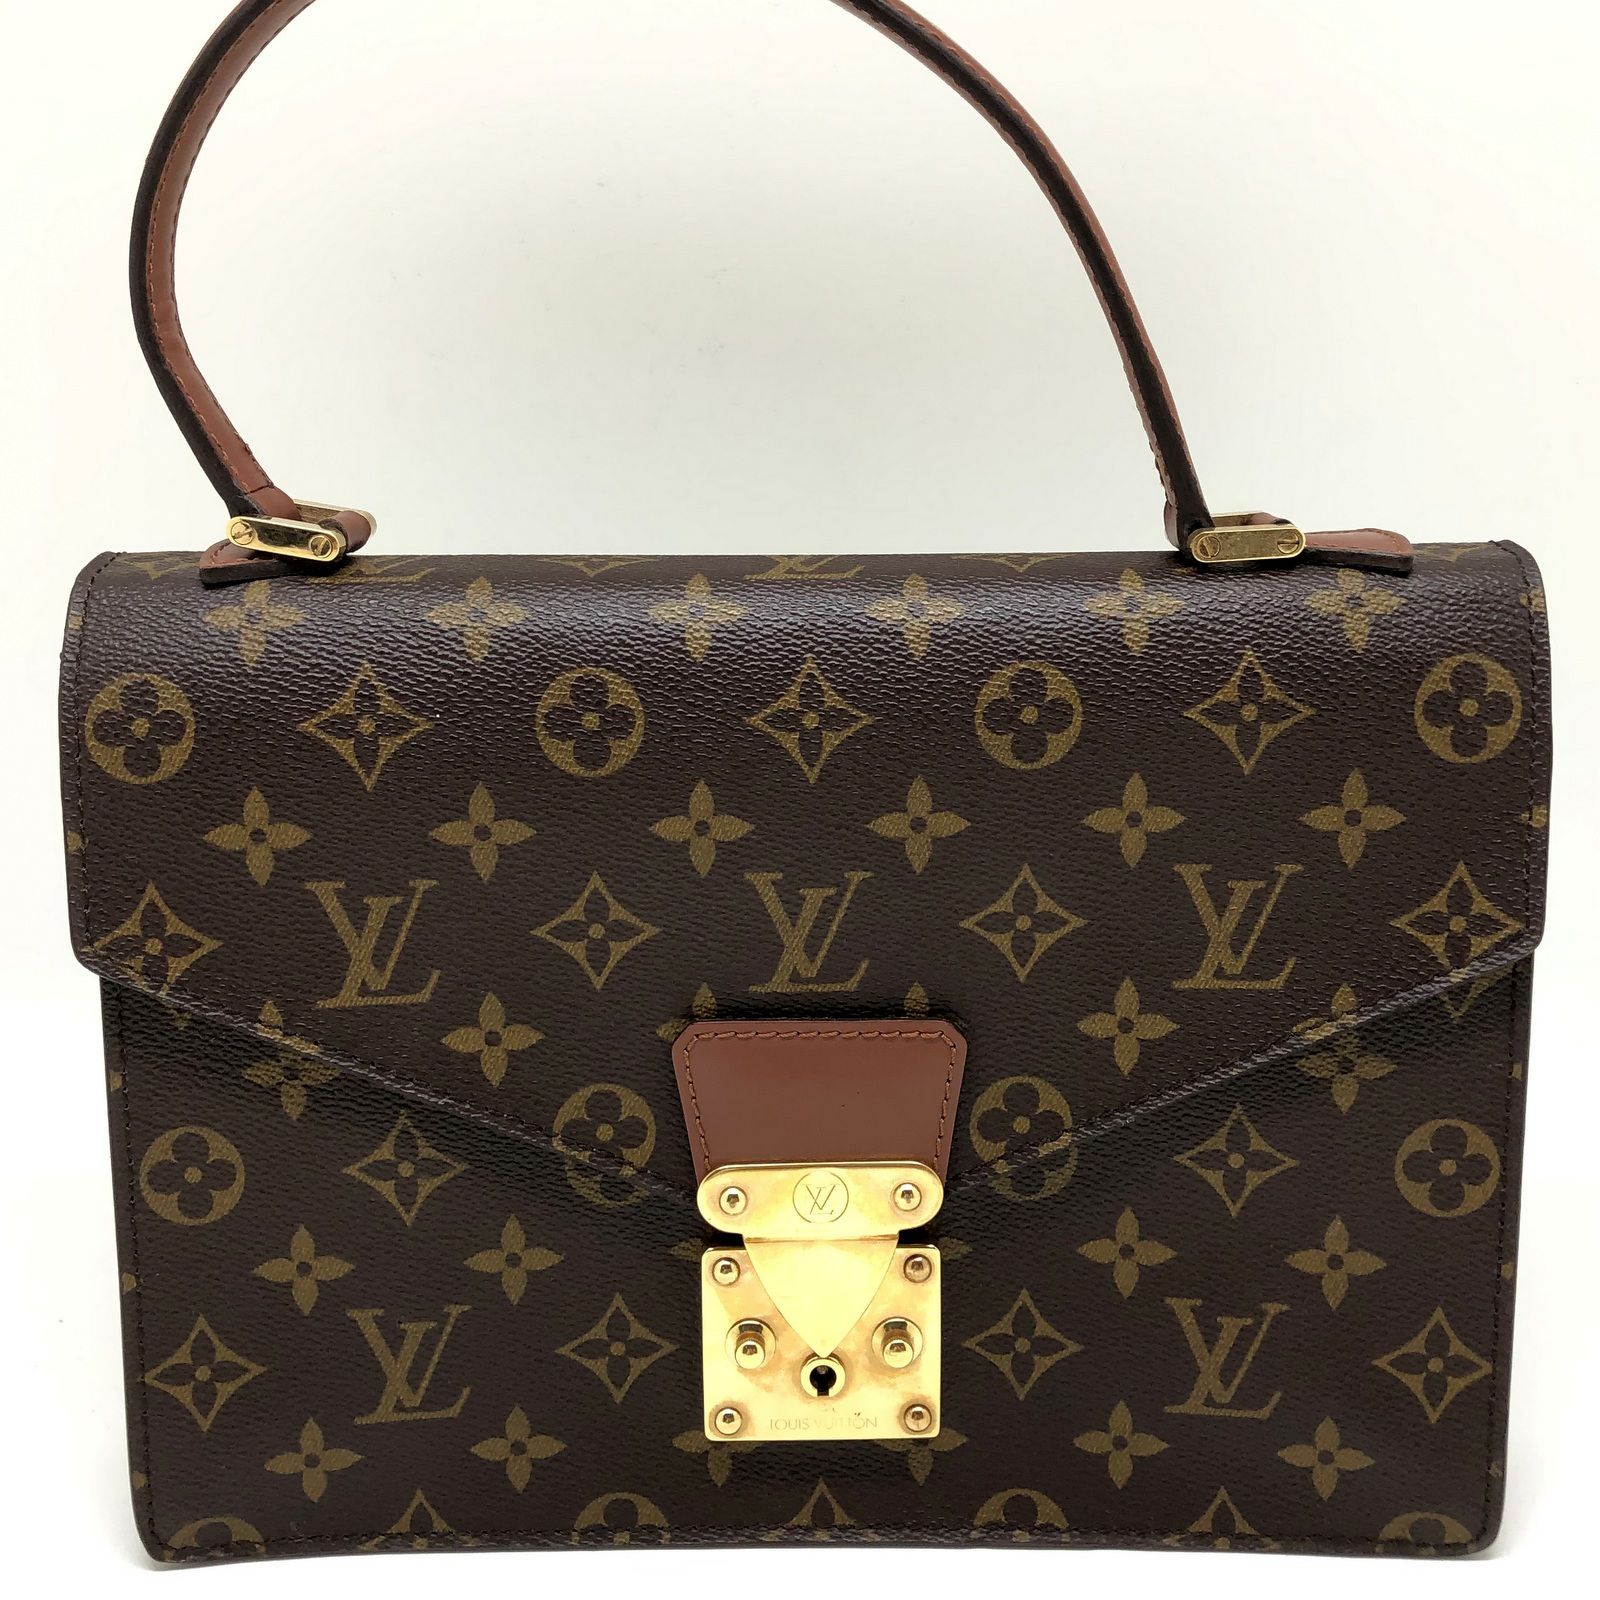 LOUIS VUITTON ヴィトン コンコルド M51190 モノグラム - USED MARKET